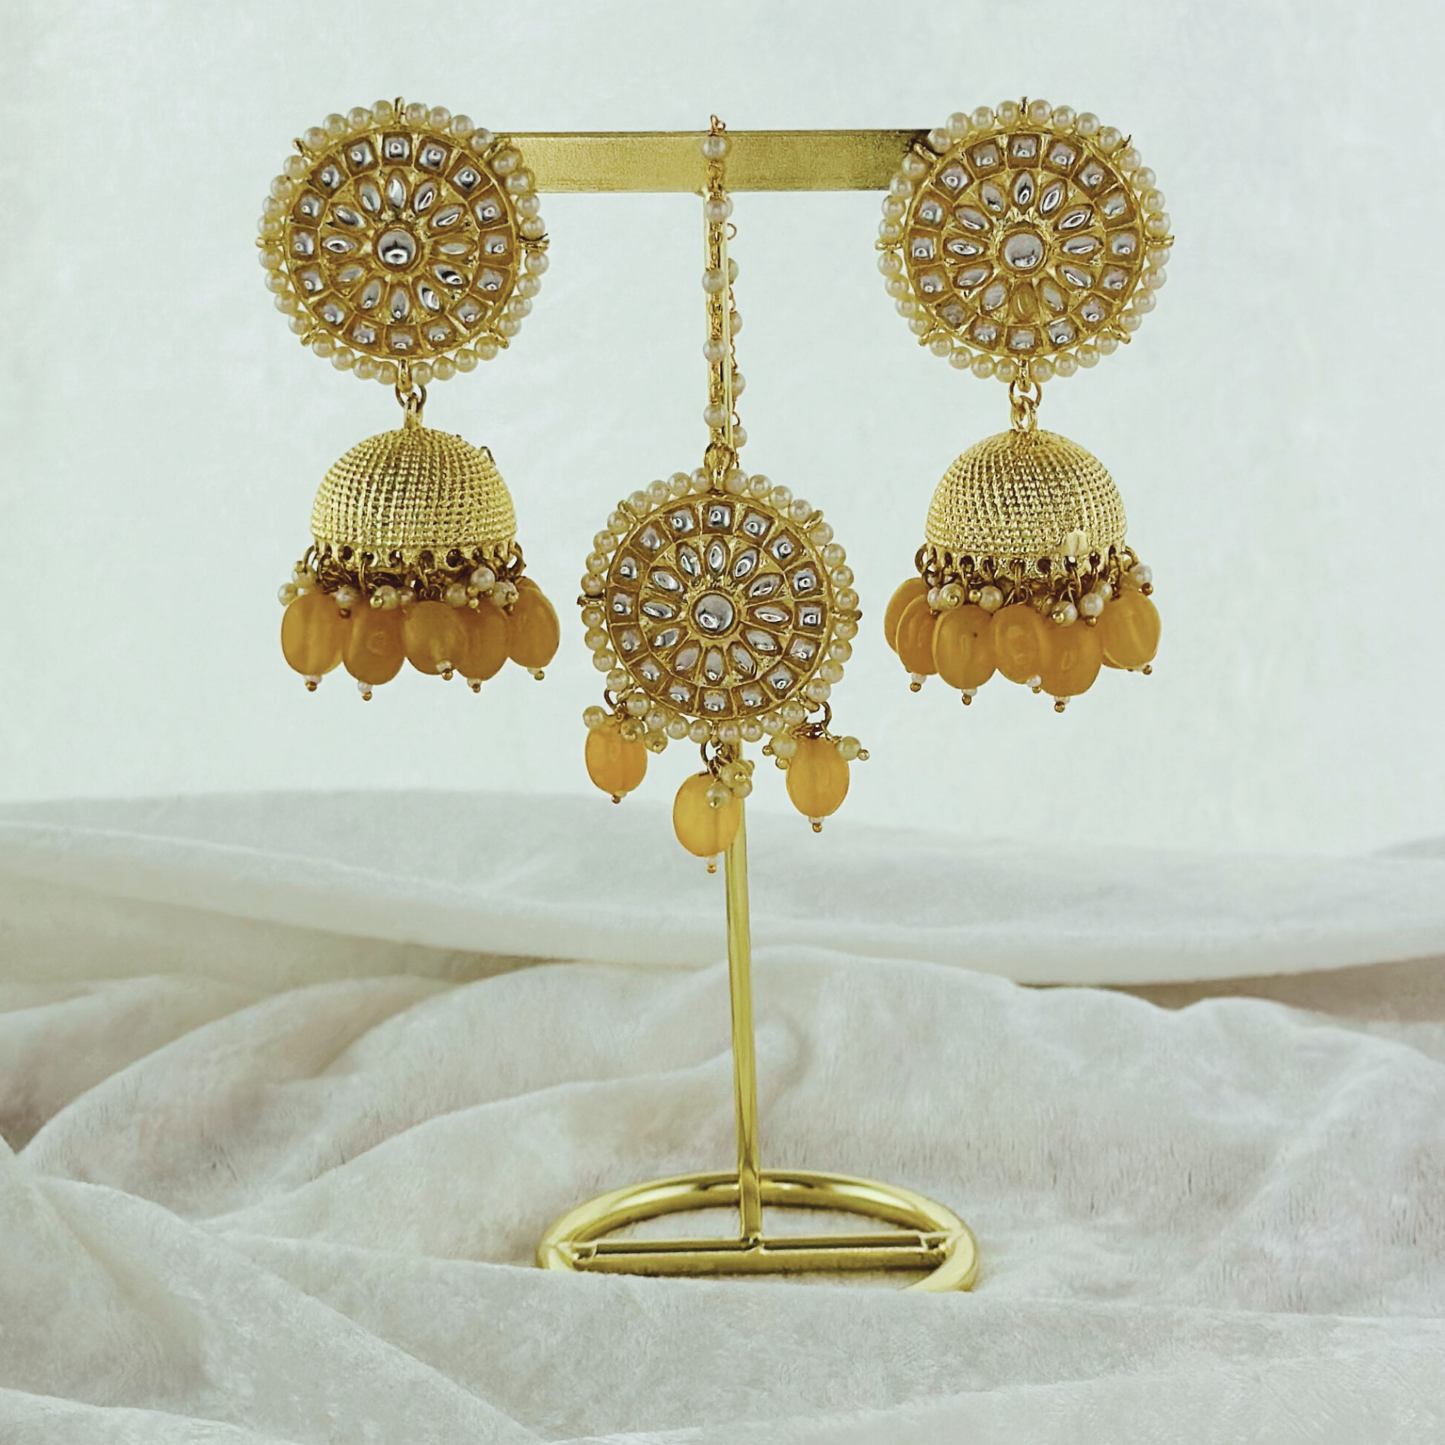 Tikka & earring set in yellow.  High quality beads, pearls and stone work.   Latest 2023 fashion for weddings, parties and special occasions 